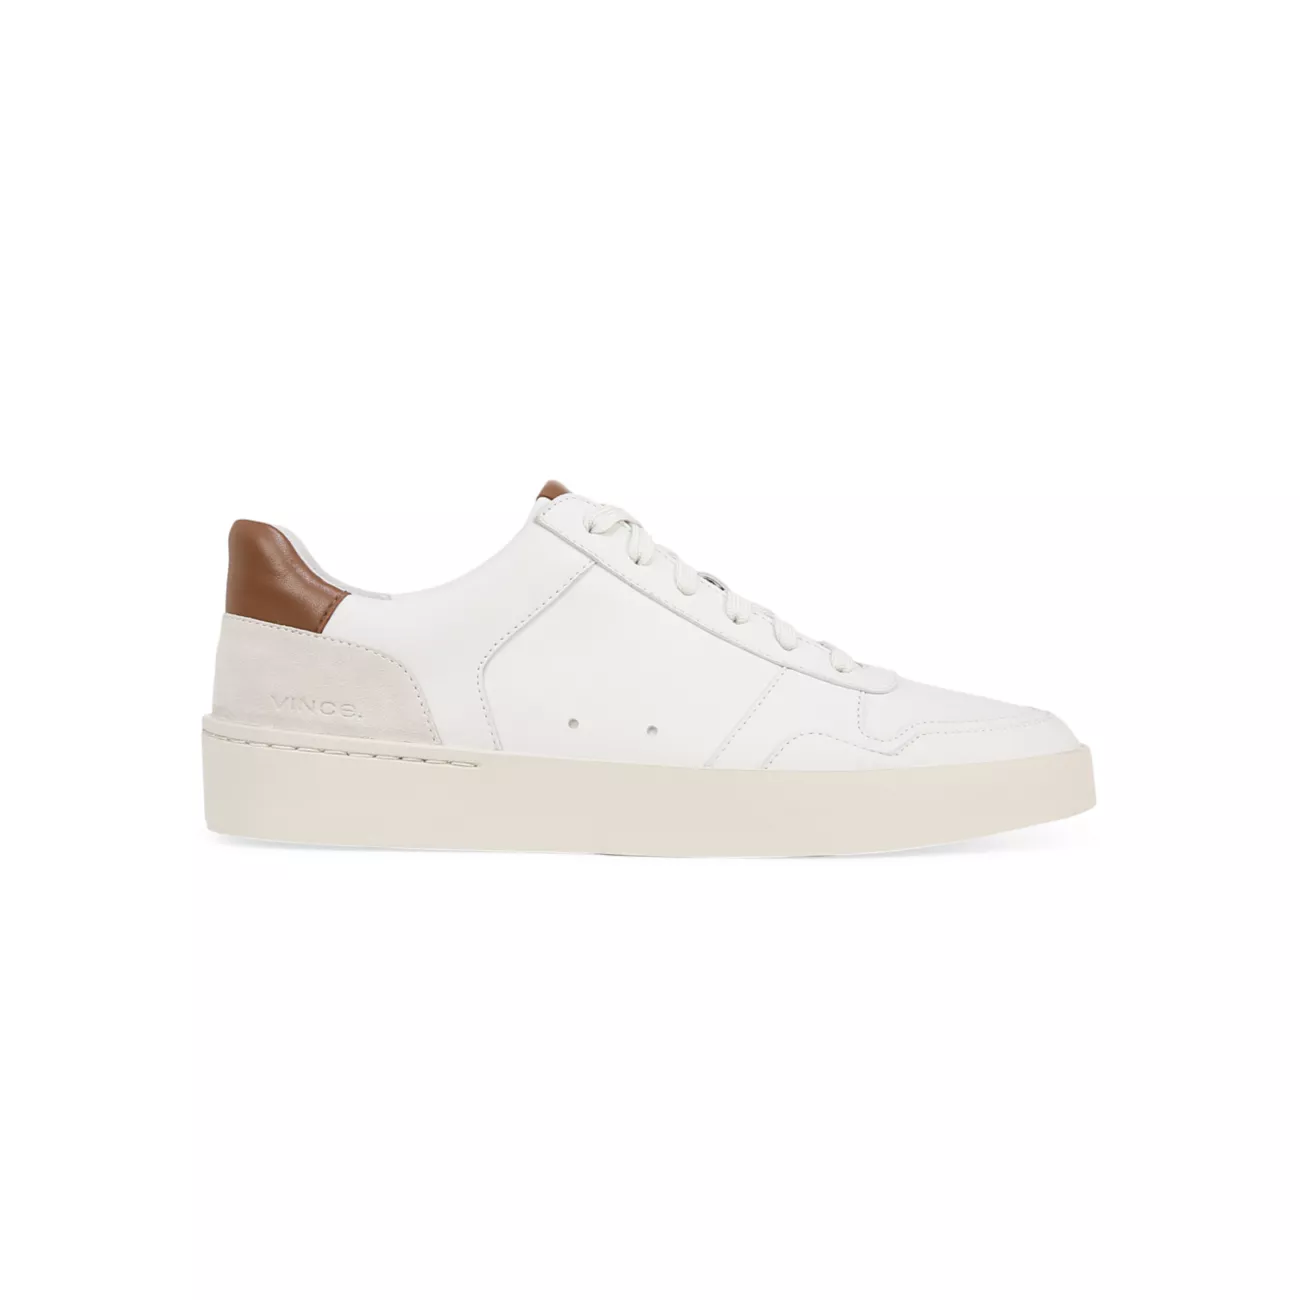 Peyton Leather Sneakers Vince